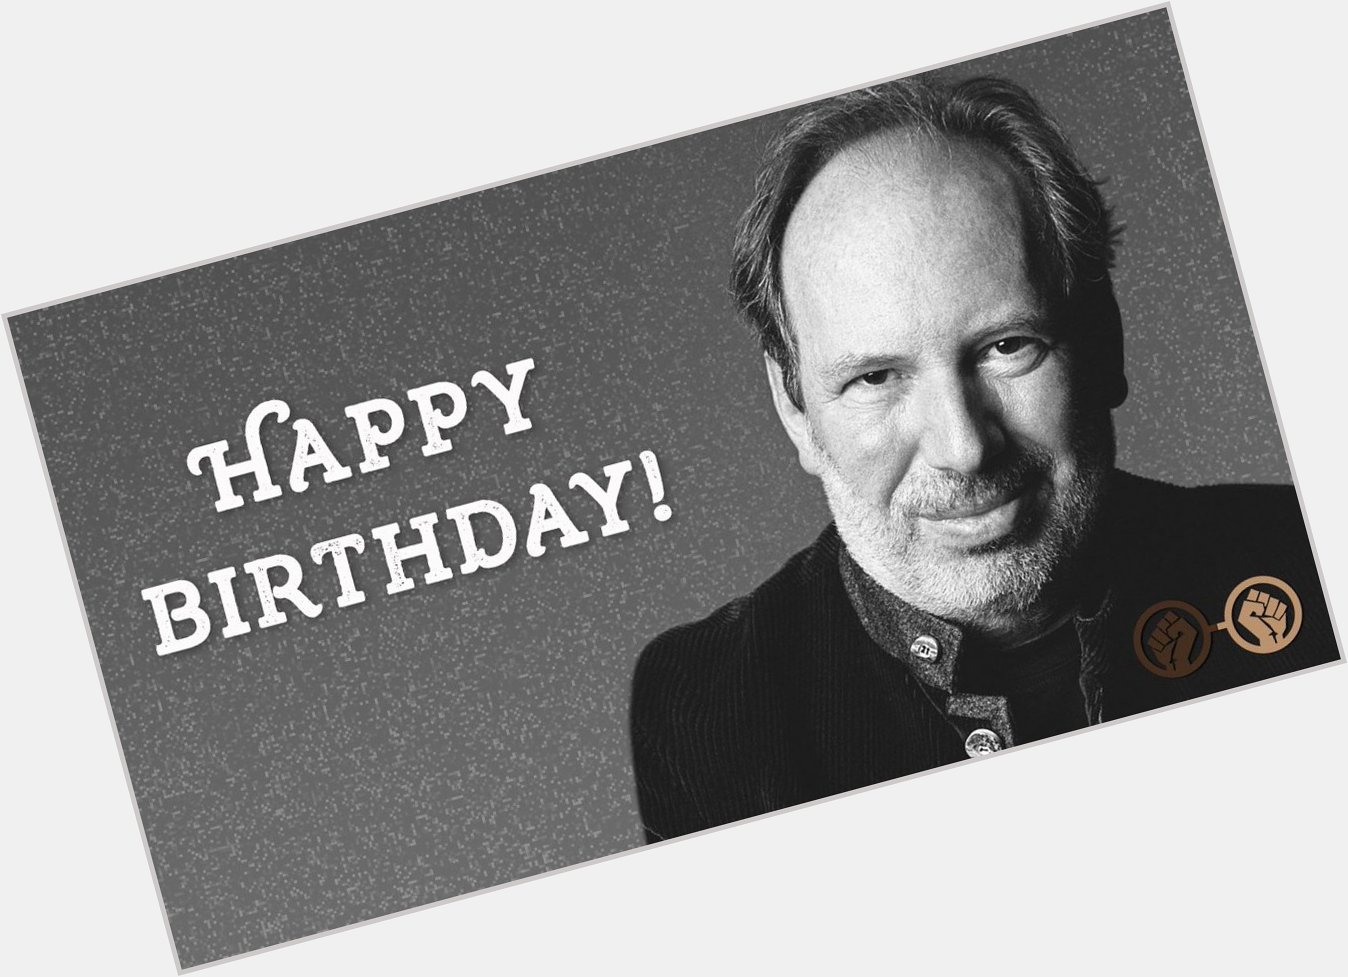 Happy birthday, Hans Zimmer! The talented composer turns 61 today. We hope he\s having a good day! 